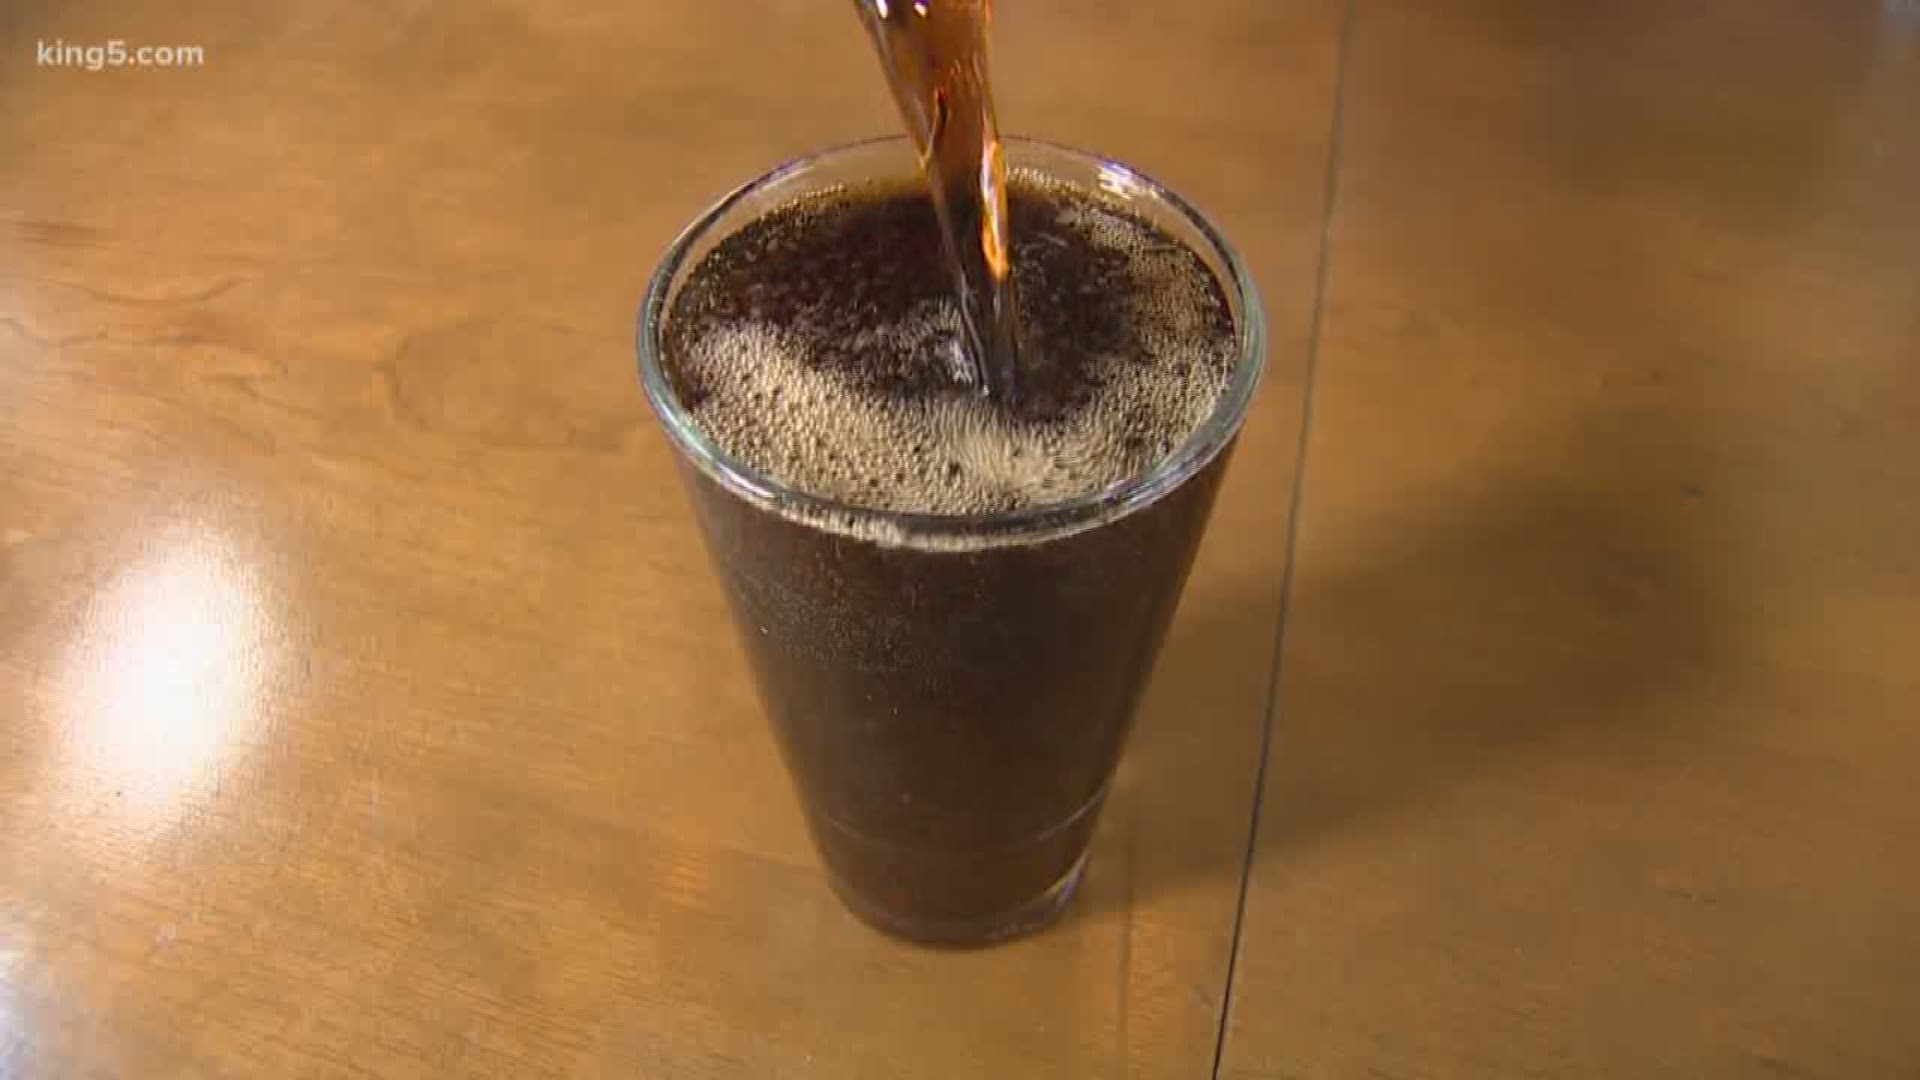 Seattle's City Council has overriden a veto by Mayor Durkan to keep the soda tax flowing for it's original purpose. KING 5's Chris Daniels reports.